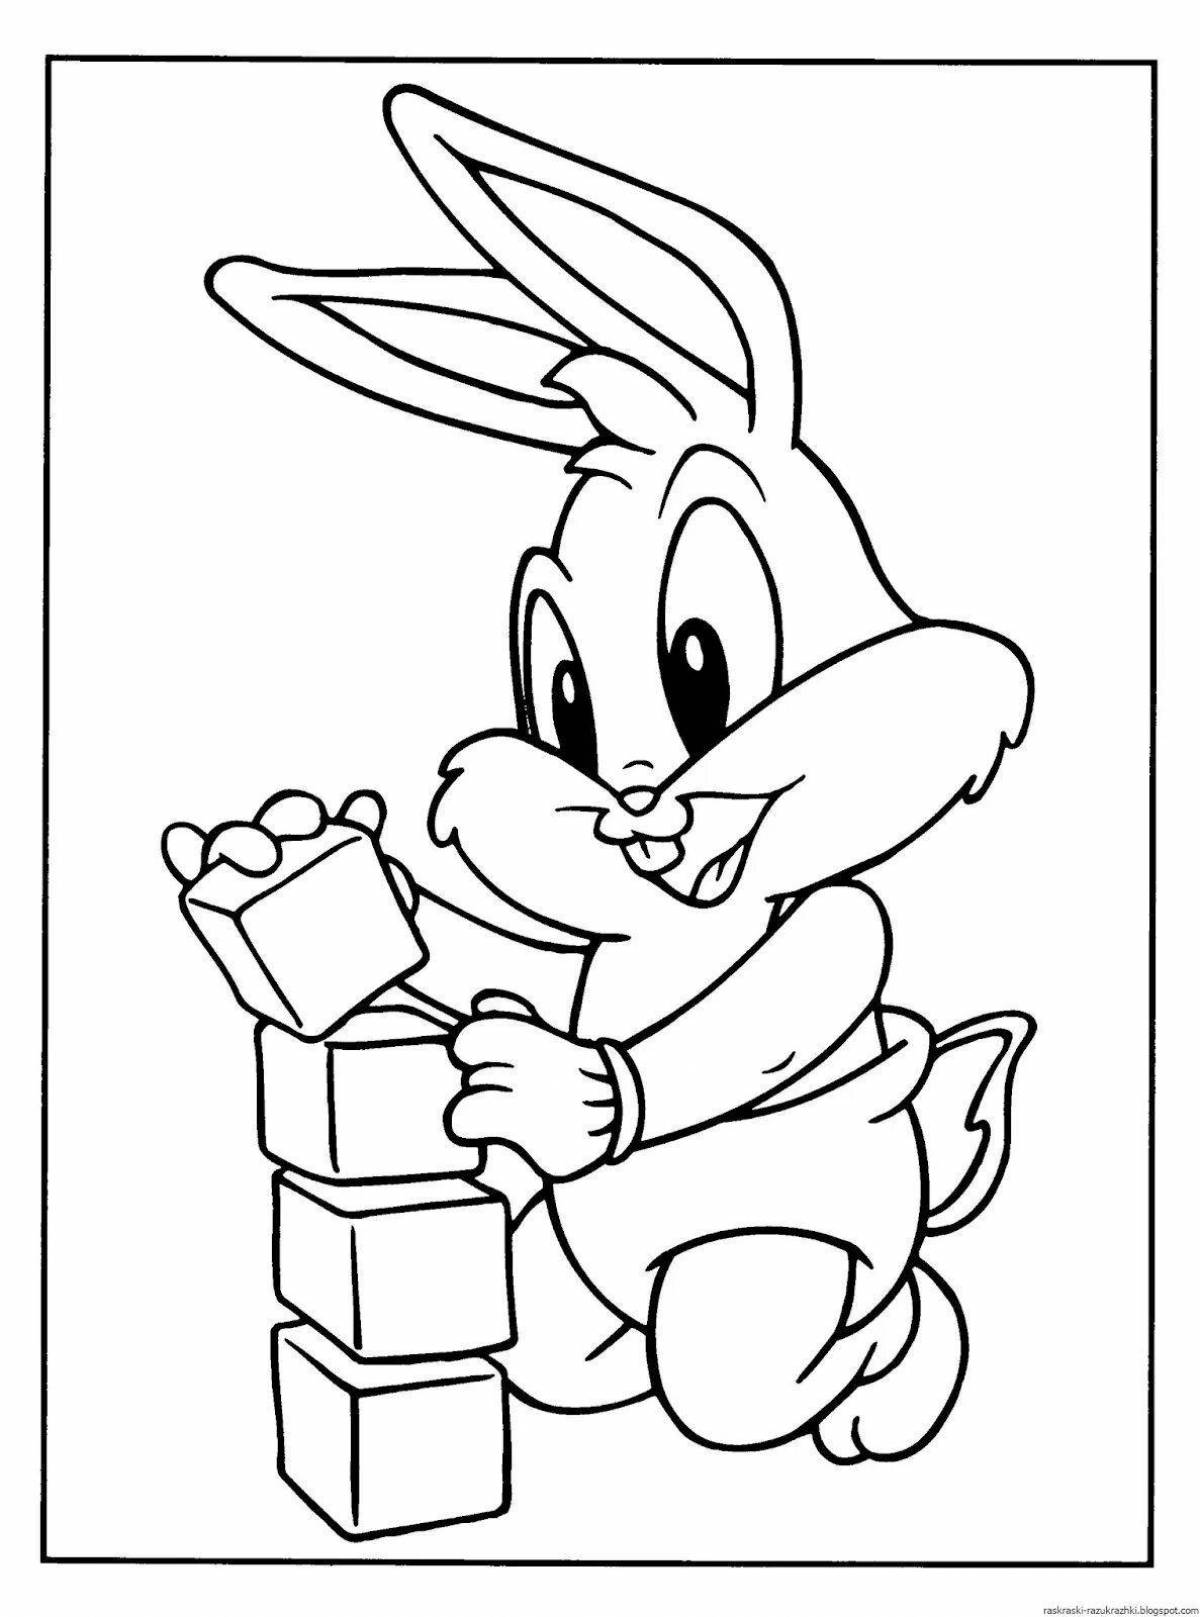 Exciting cartoon coloring pages for kids 6-7 years old